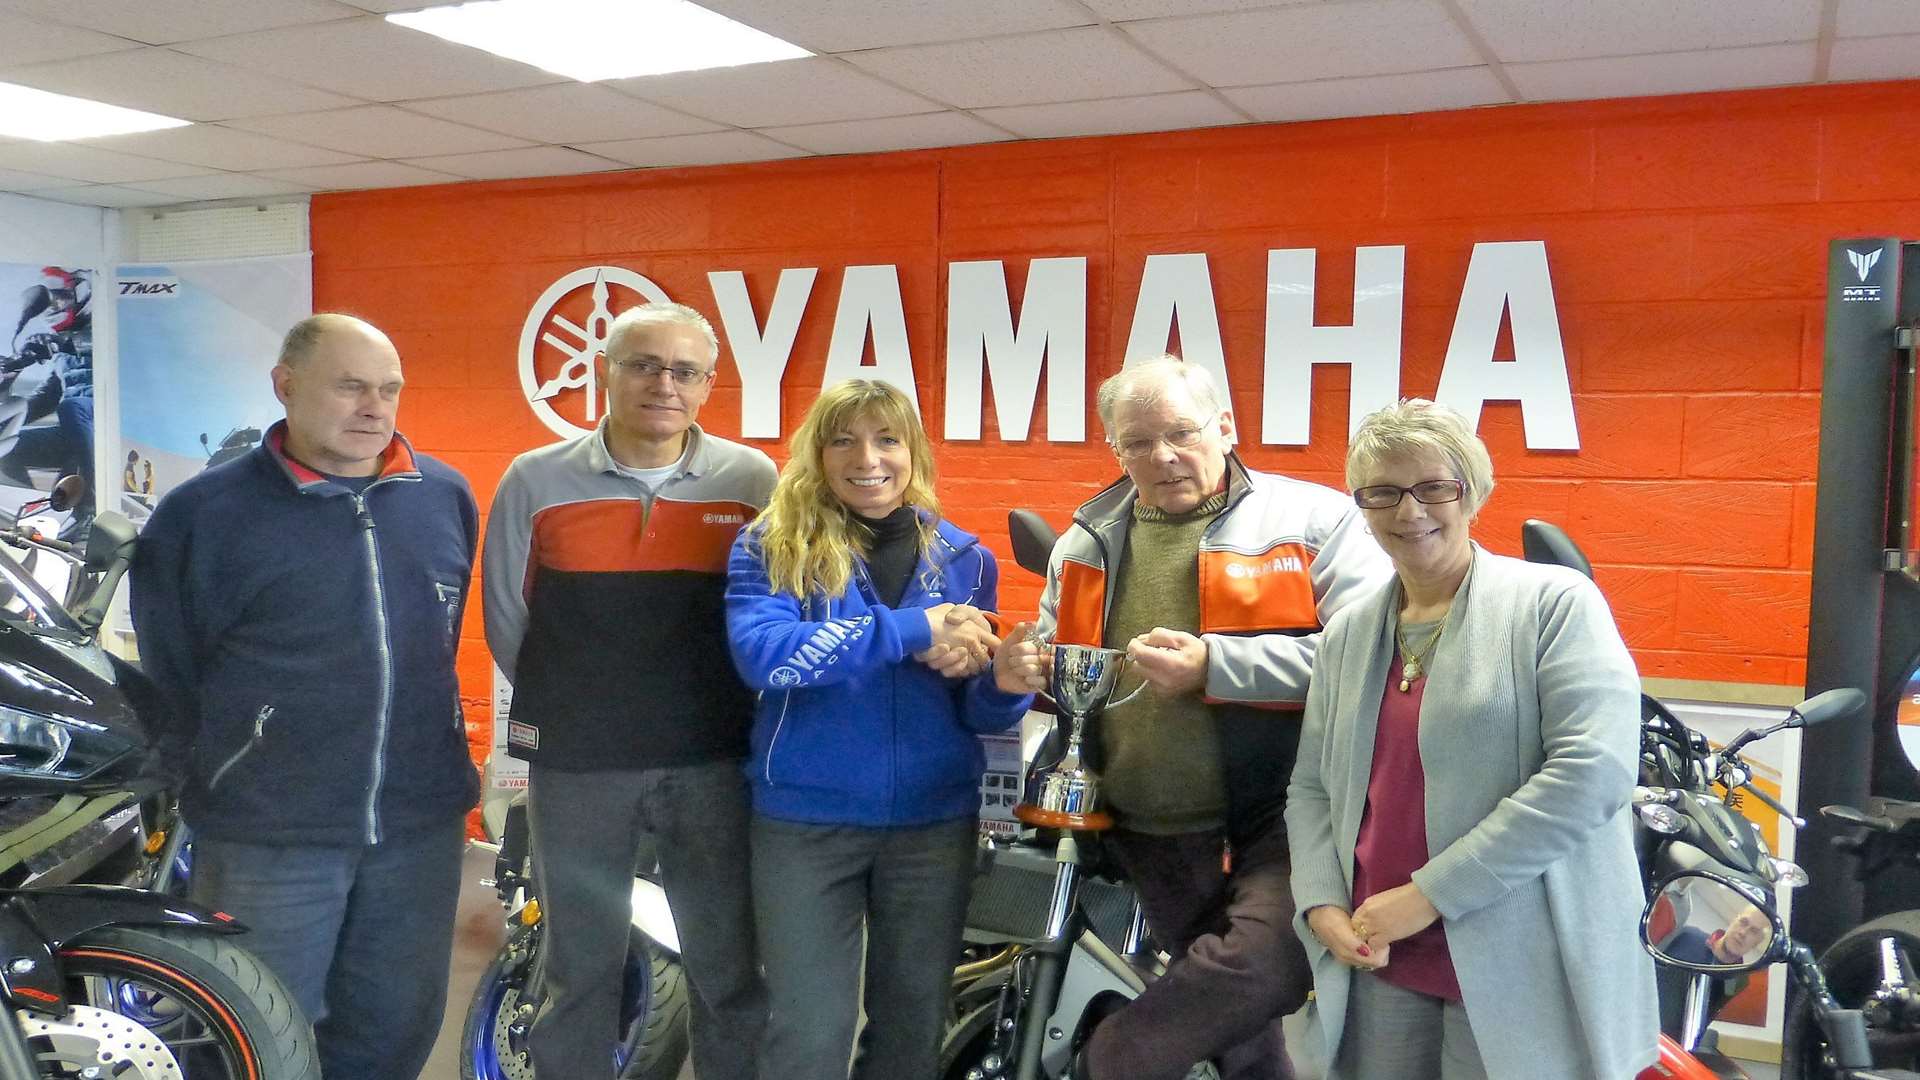 Tony (second from right) is retiring after 40 years at the Yamaha bike shop in the Mall, Faversham.